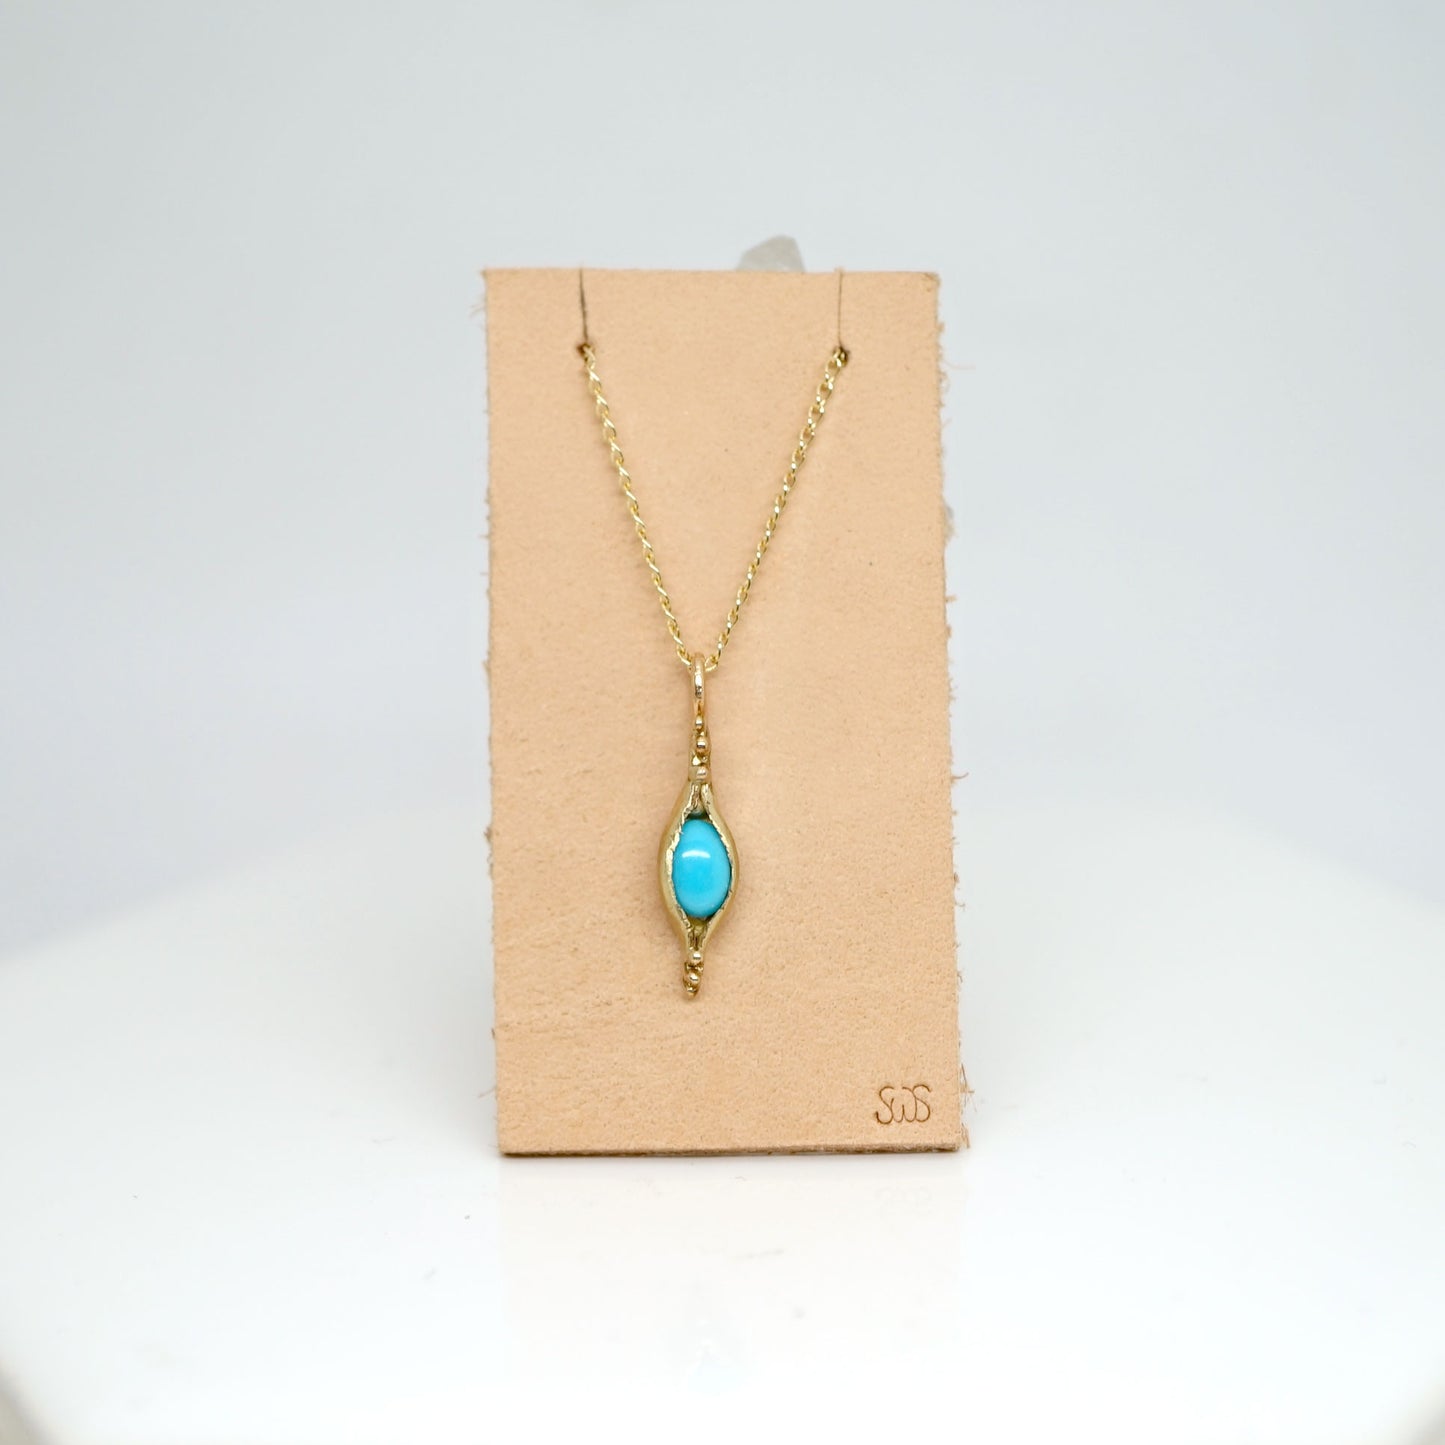 Pod pendant necklace with turquoise